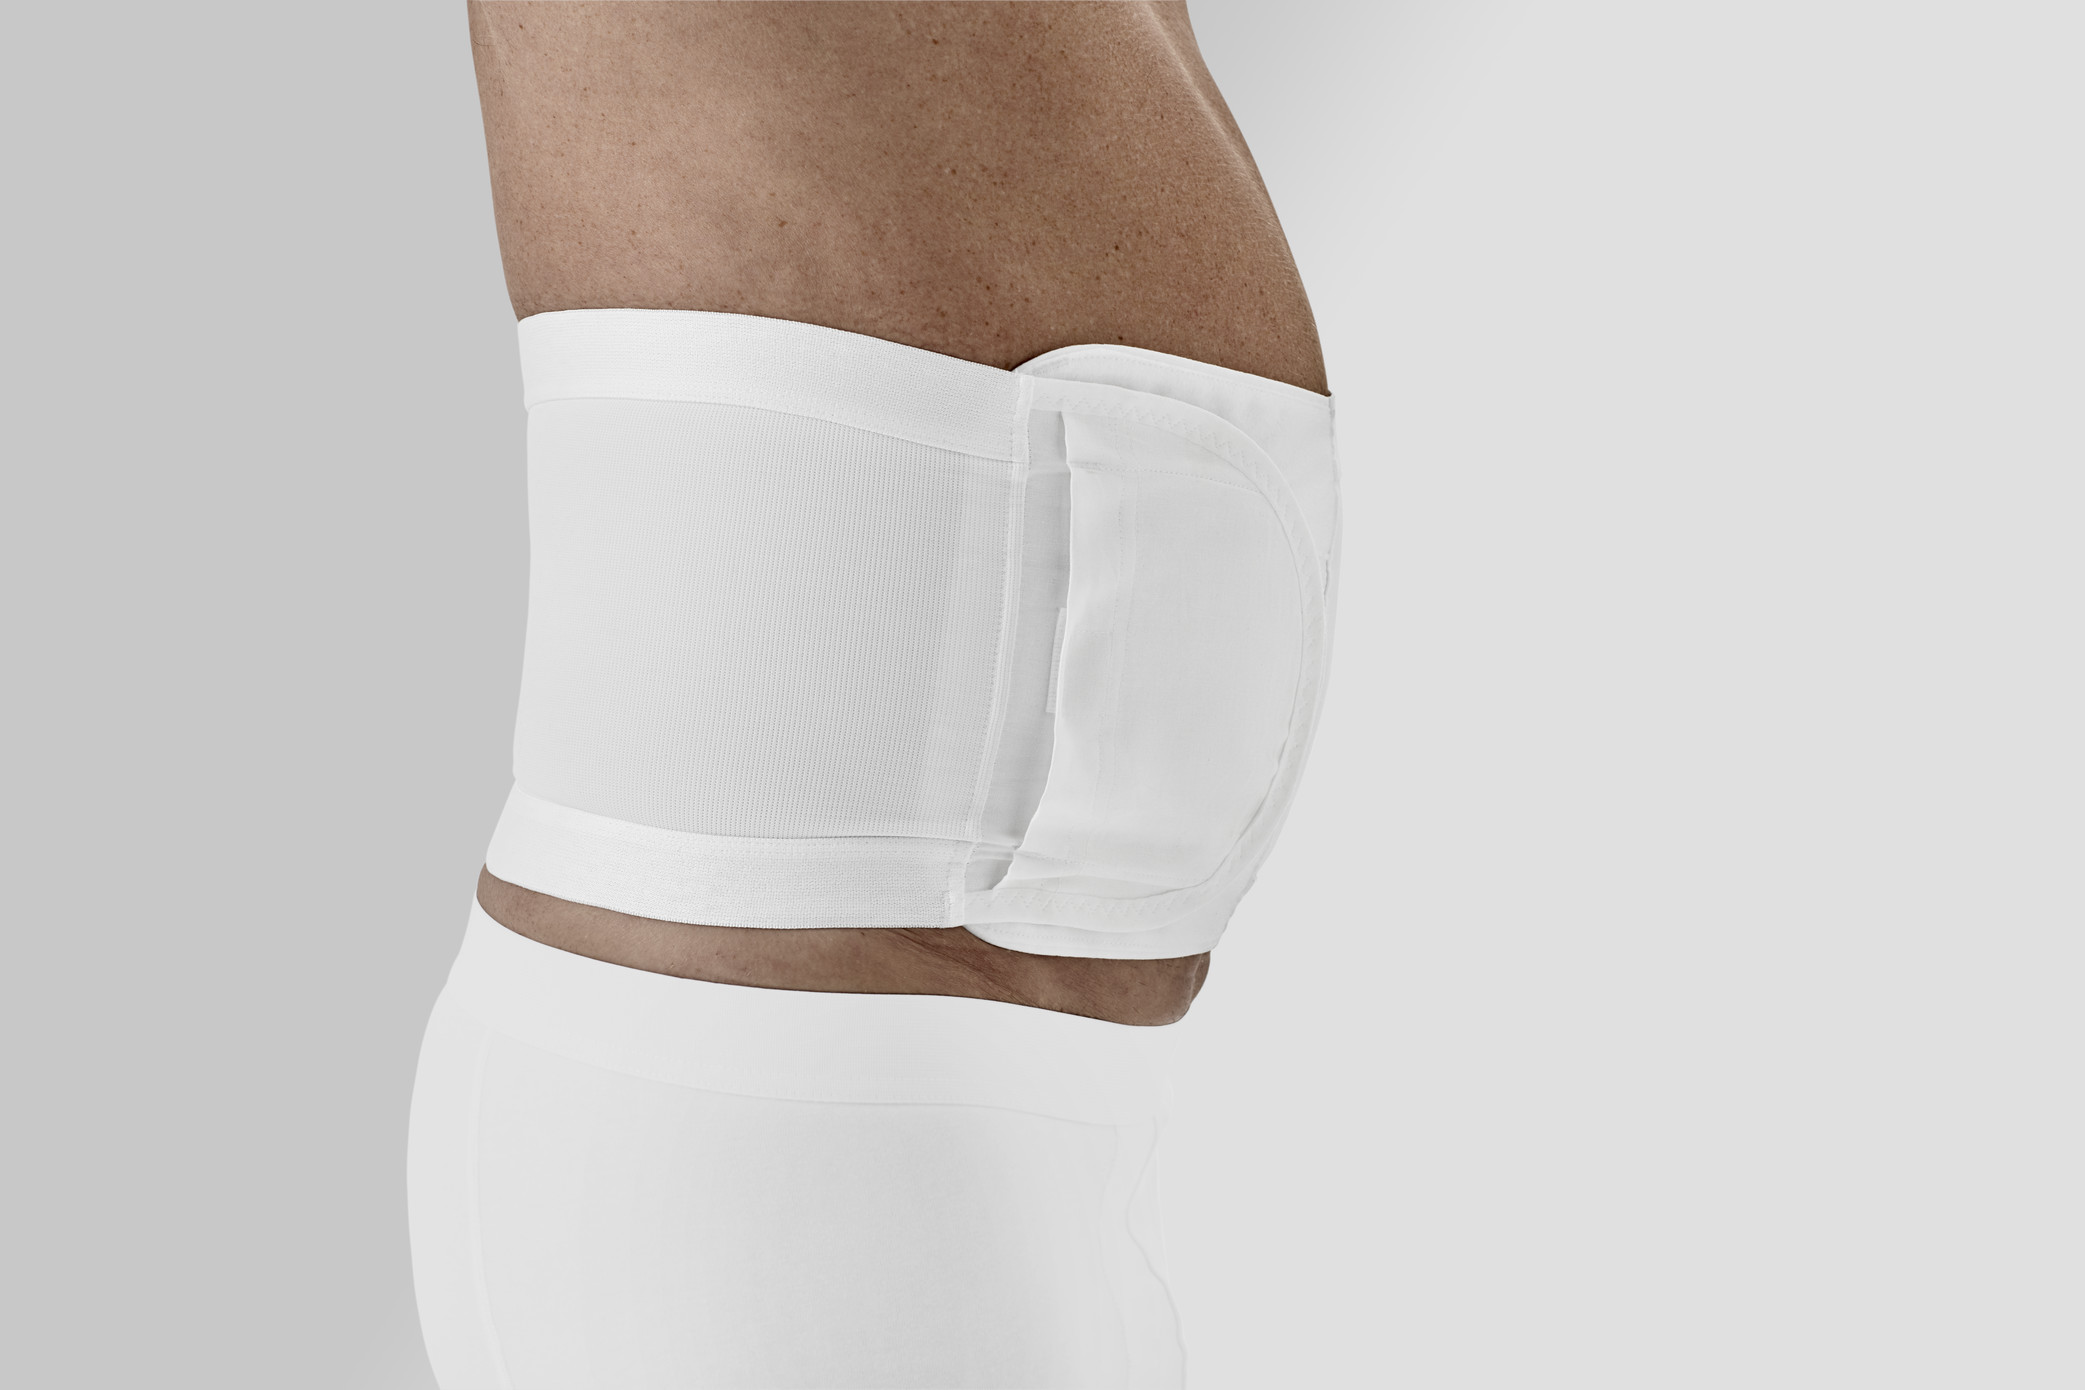 Supportive Belts, Ostomy, Hernia and Urostomy Belts